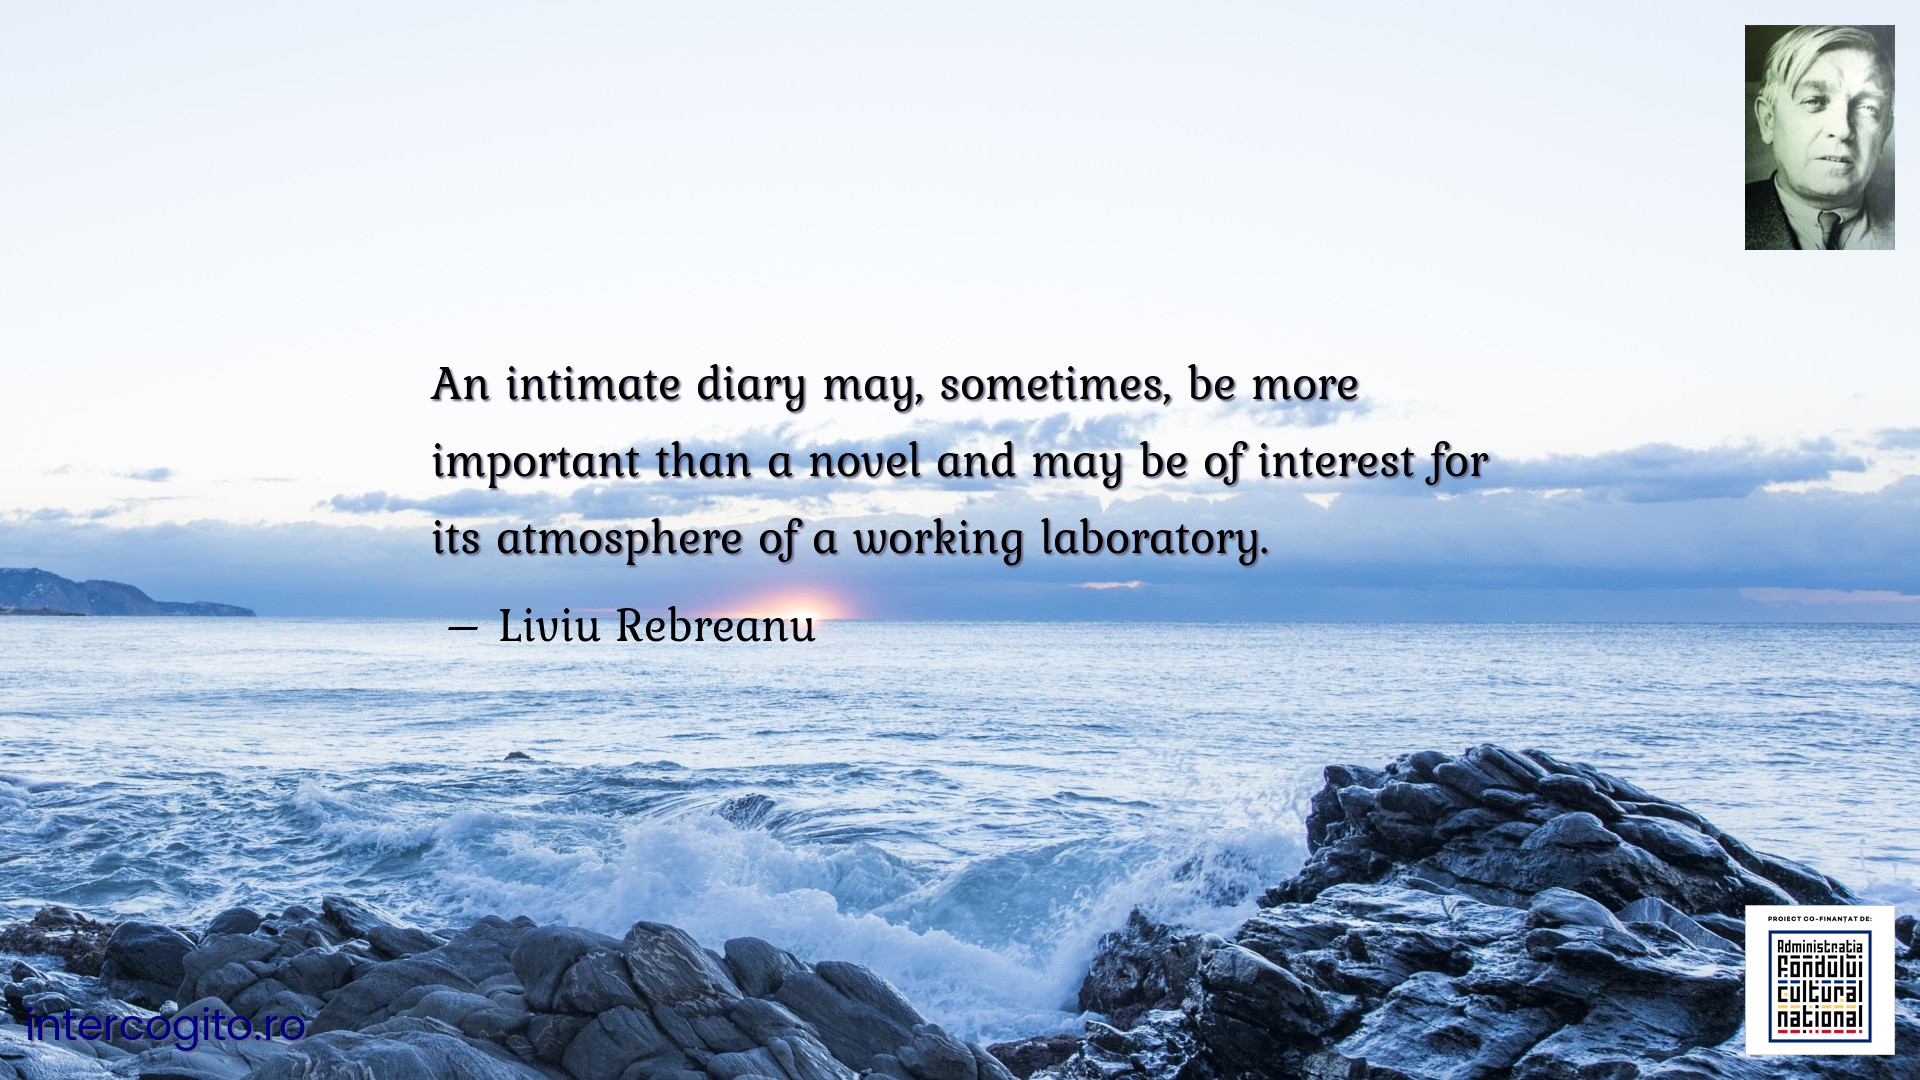 An intimate diary may, sometimes, be more important than a novel and may be of interest for its atmosphere of a working laboratory.